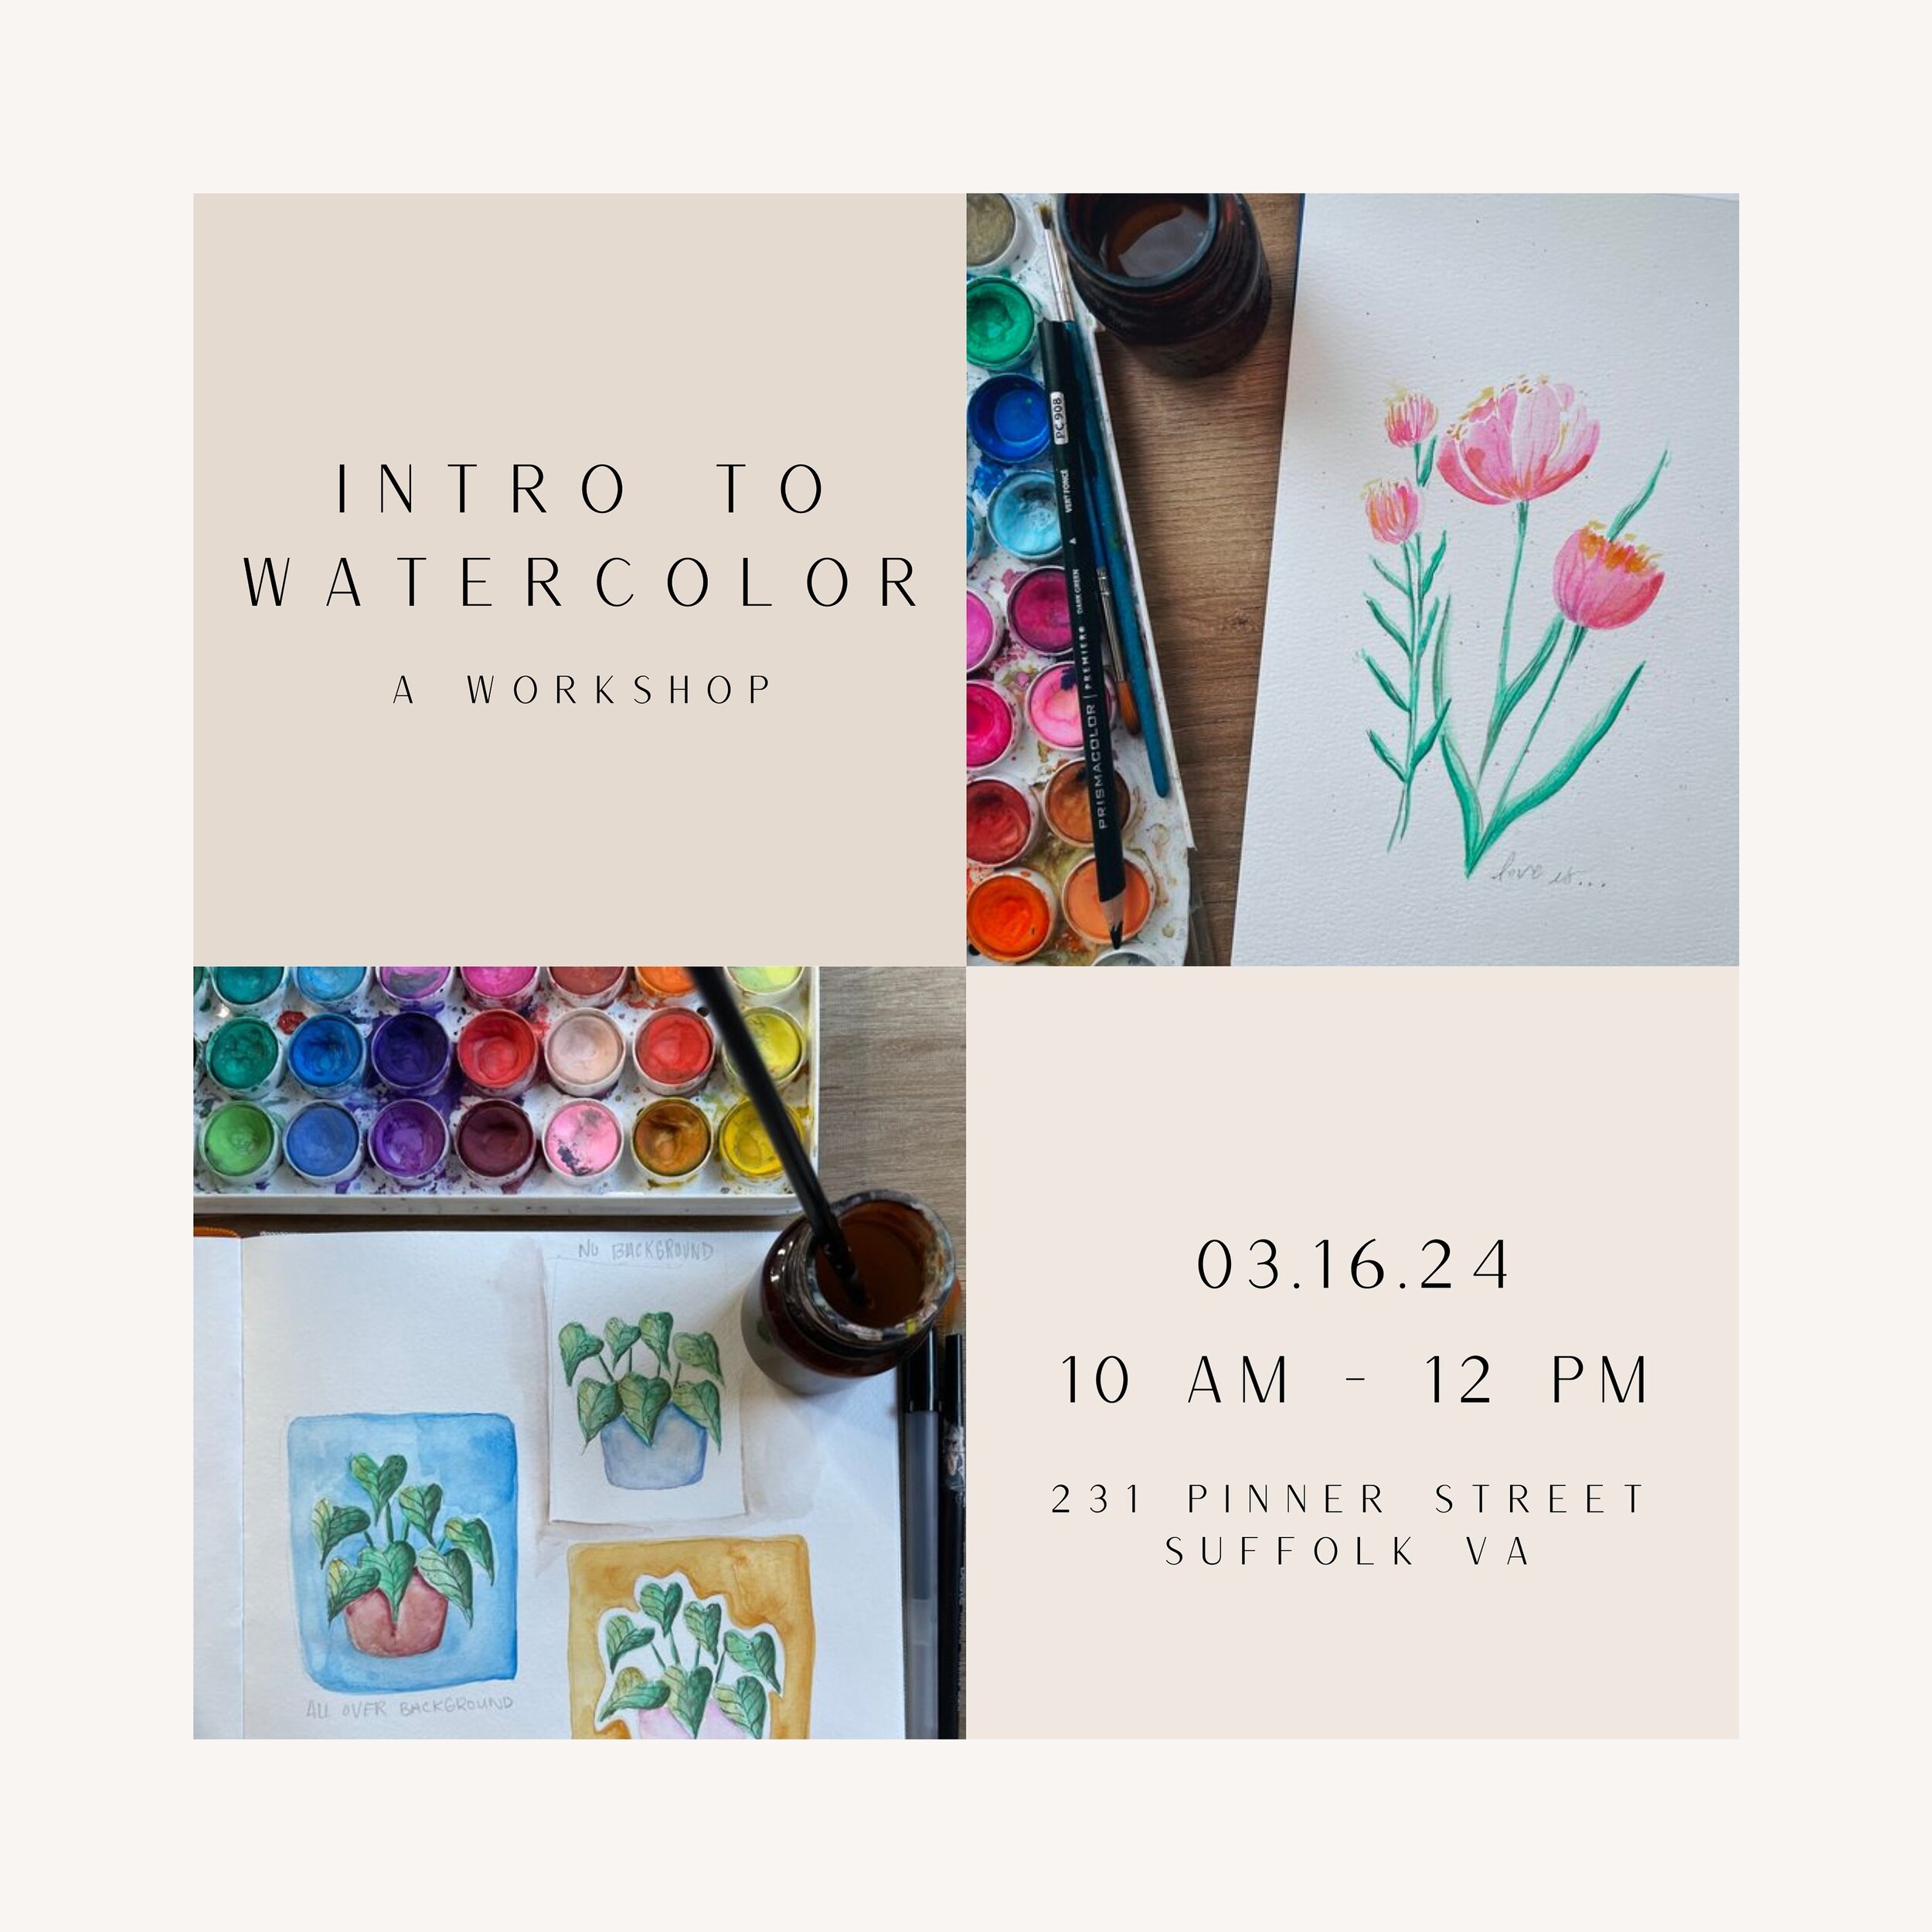 INTRO TO WATERCOLOR

The lovely and talented @monellisa will be taking us on a journey to take the stigma of watercolor painting and make it more approachable and enjoyable!

🎨 WHEN : Saturday, March 16, 10 AM - 12 PM

🎨 WHERE : The Pinner House &a